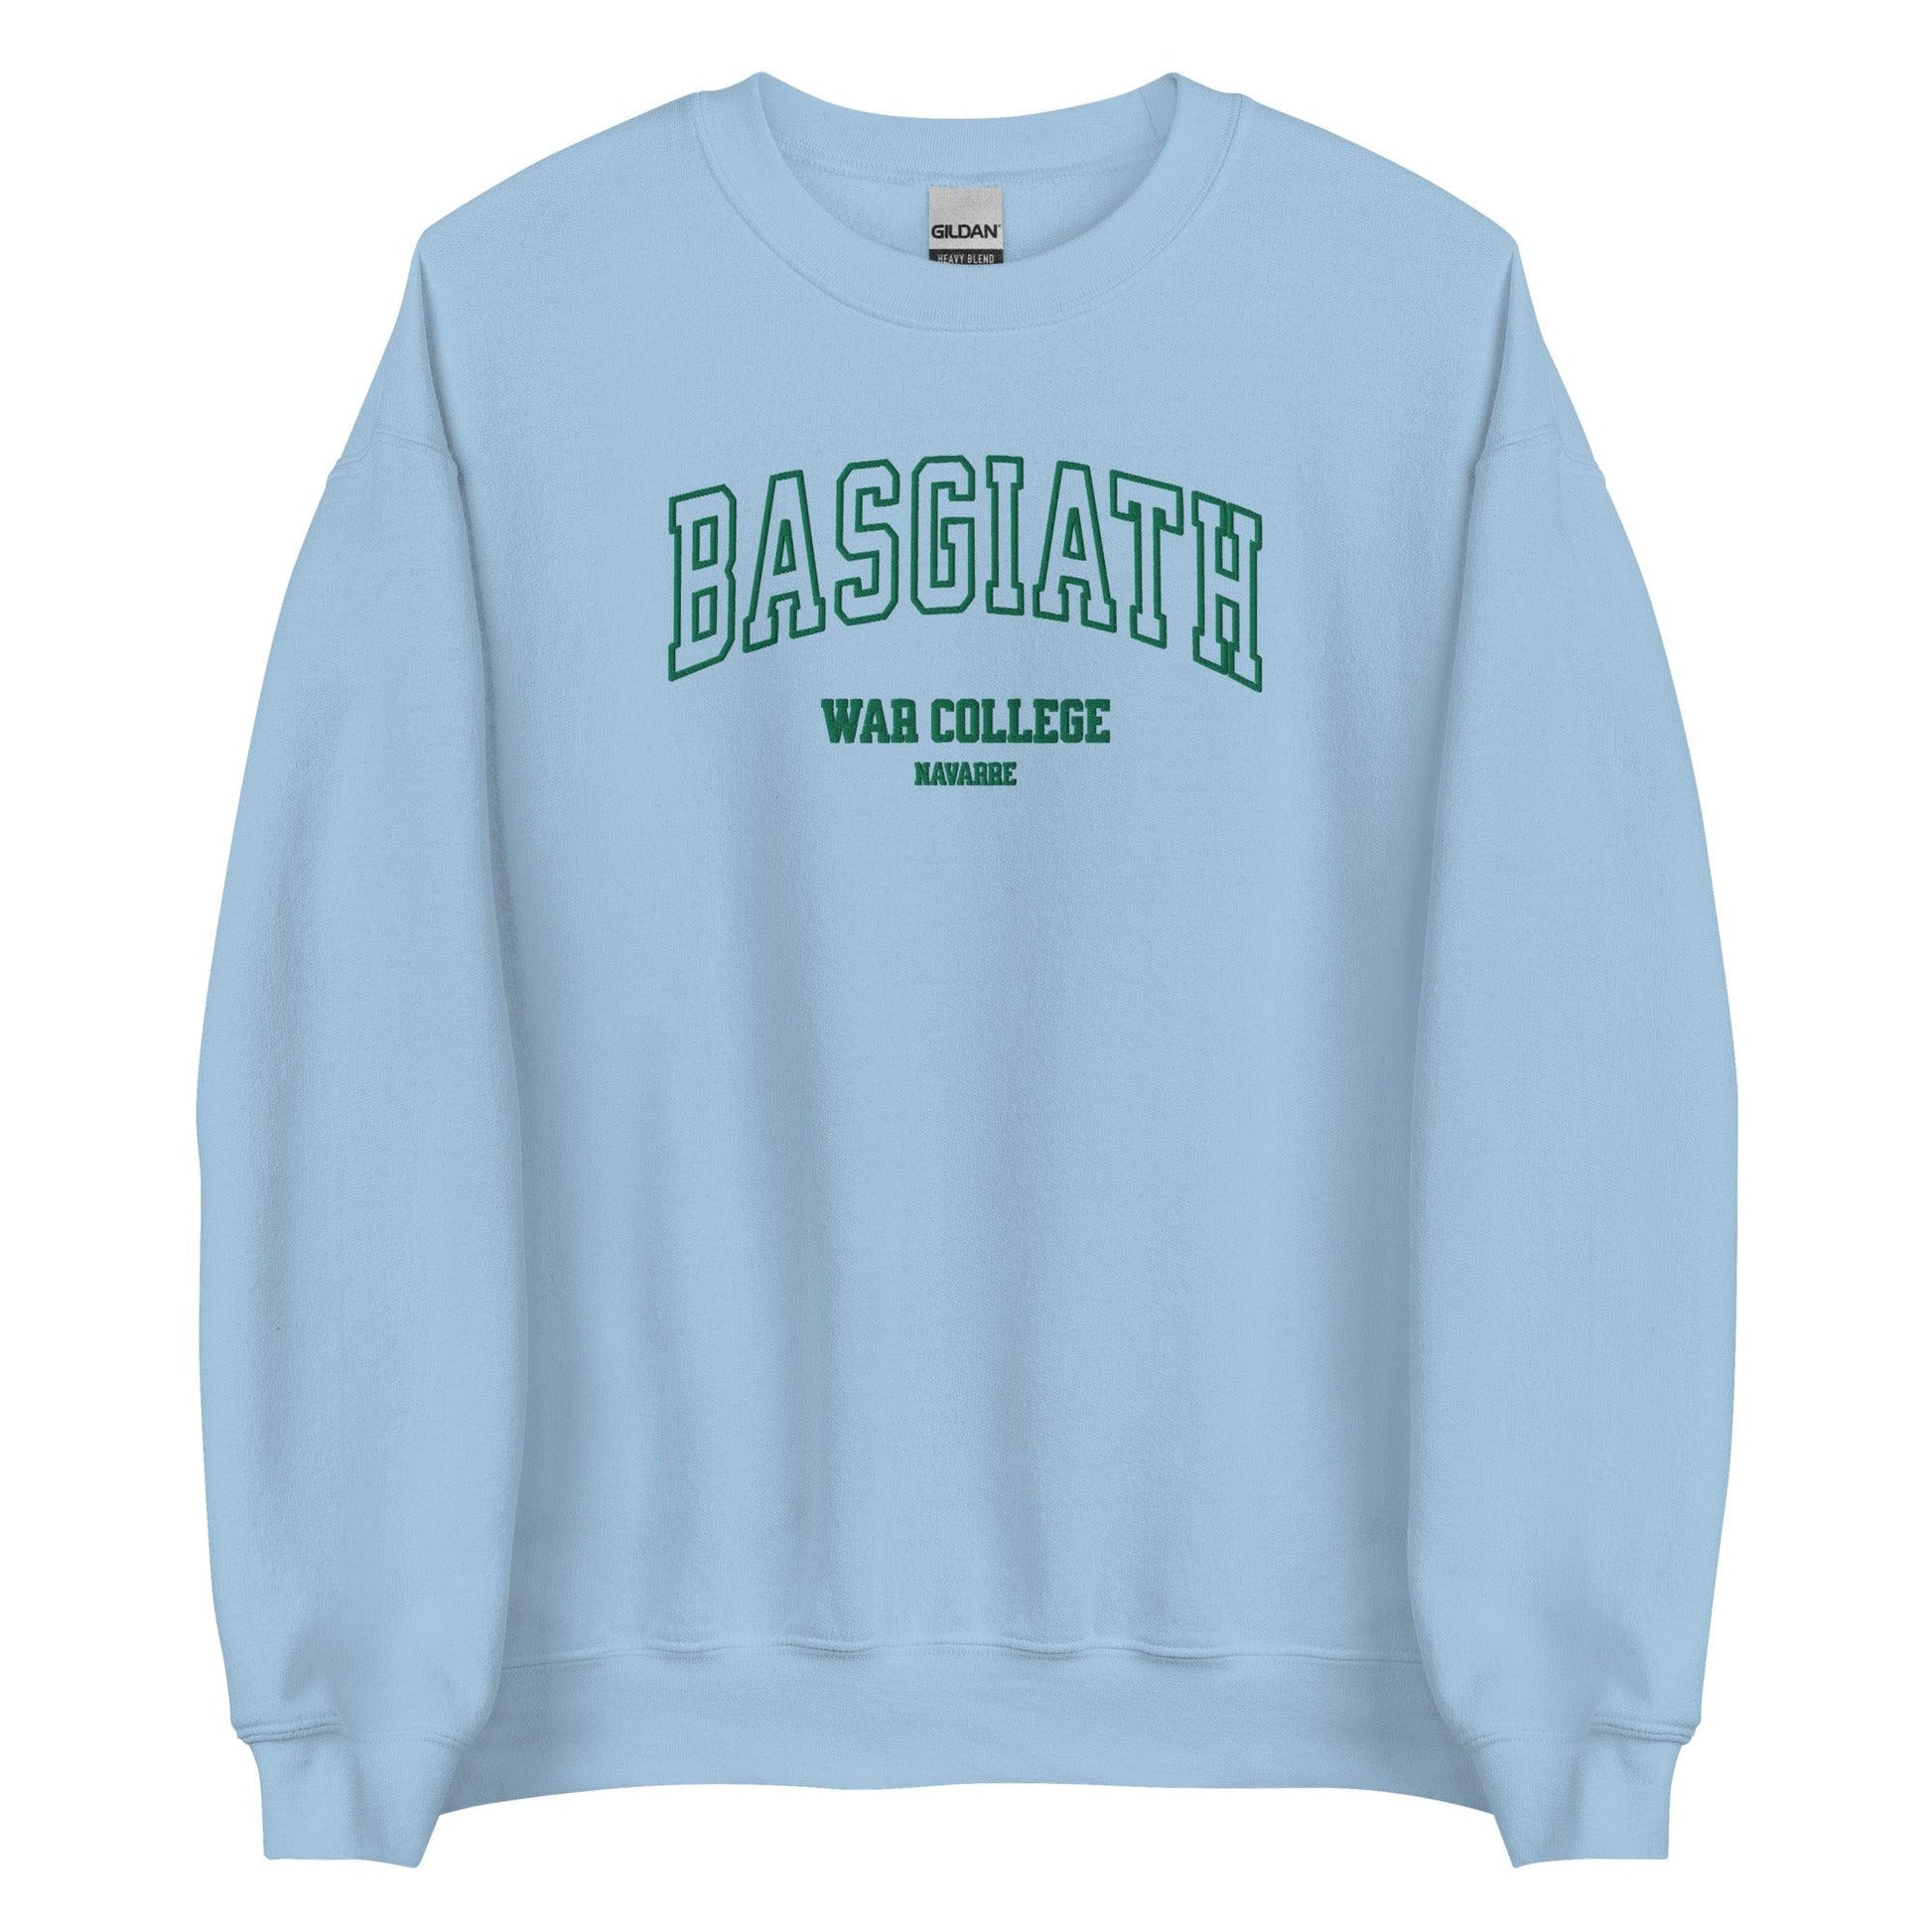 Basgiath War College Embroidered Sweater - The Bean Workshop - embroidered, fourth wing, rebecca yarros, sweatshirt